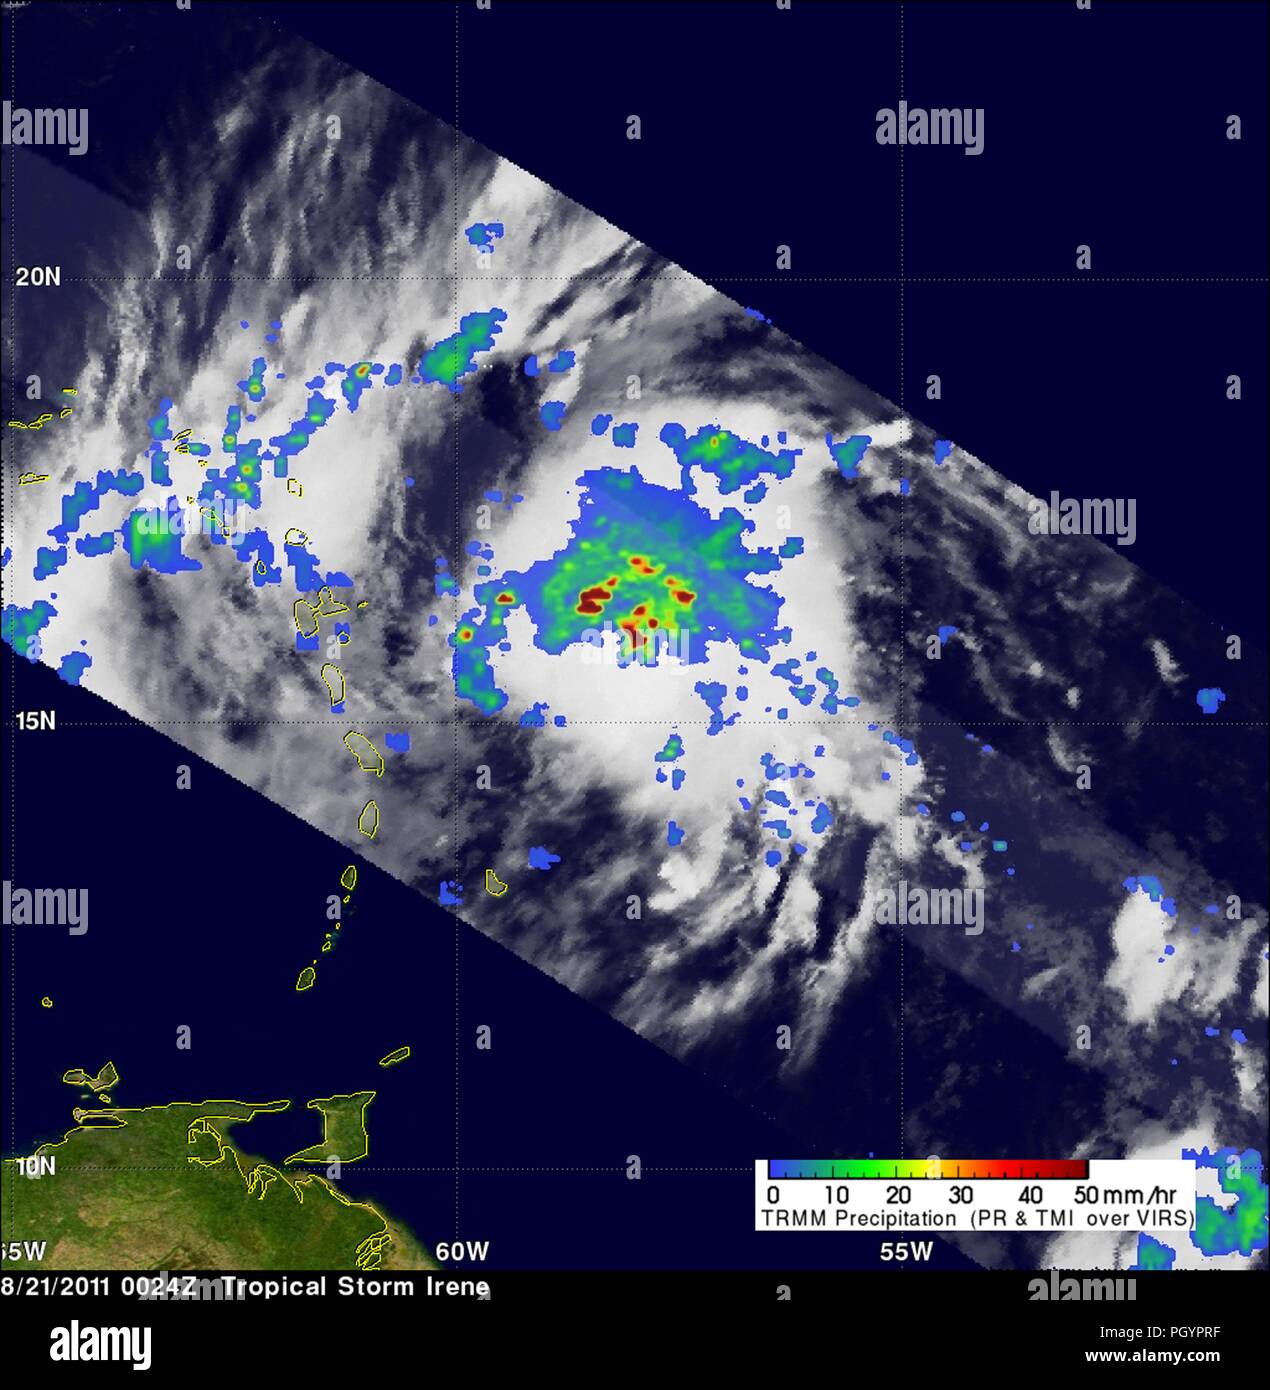 Tropical storm Irene revealed by the Tropical Rainfall Measuring Mission (TRMM) satellite, August 22, 2011. Image courtesy NASA / SSAI, Hal Pierce. () Stock Photo